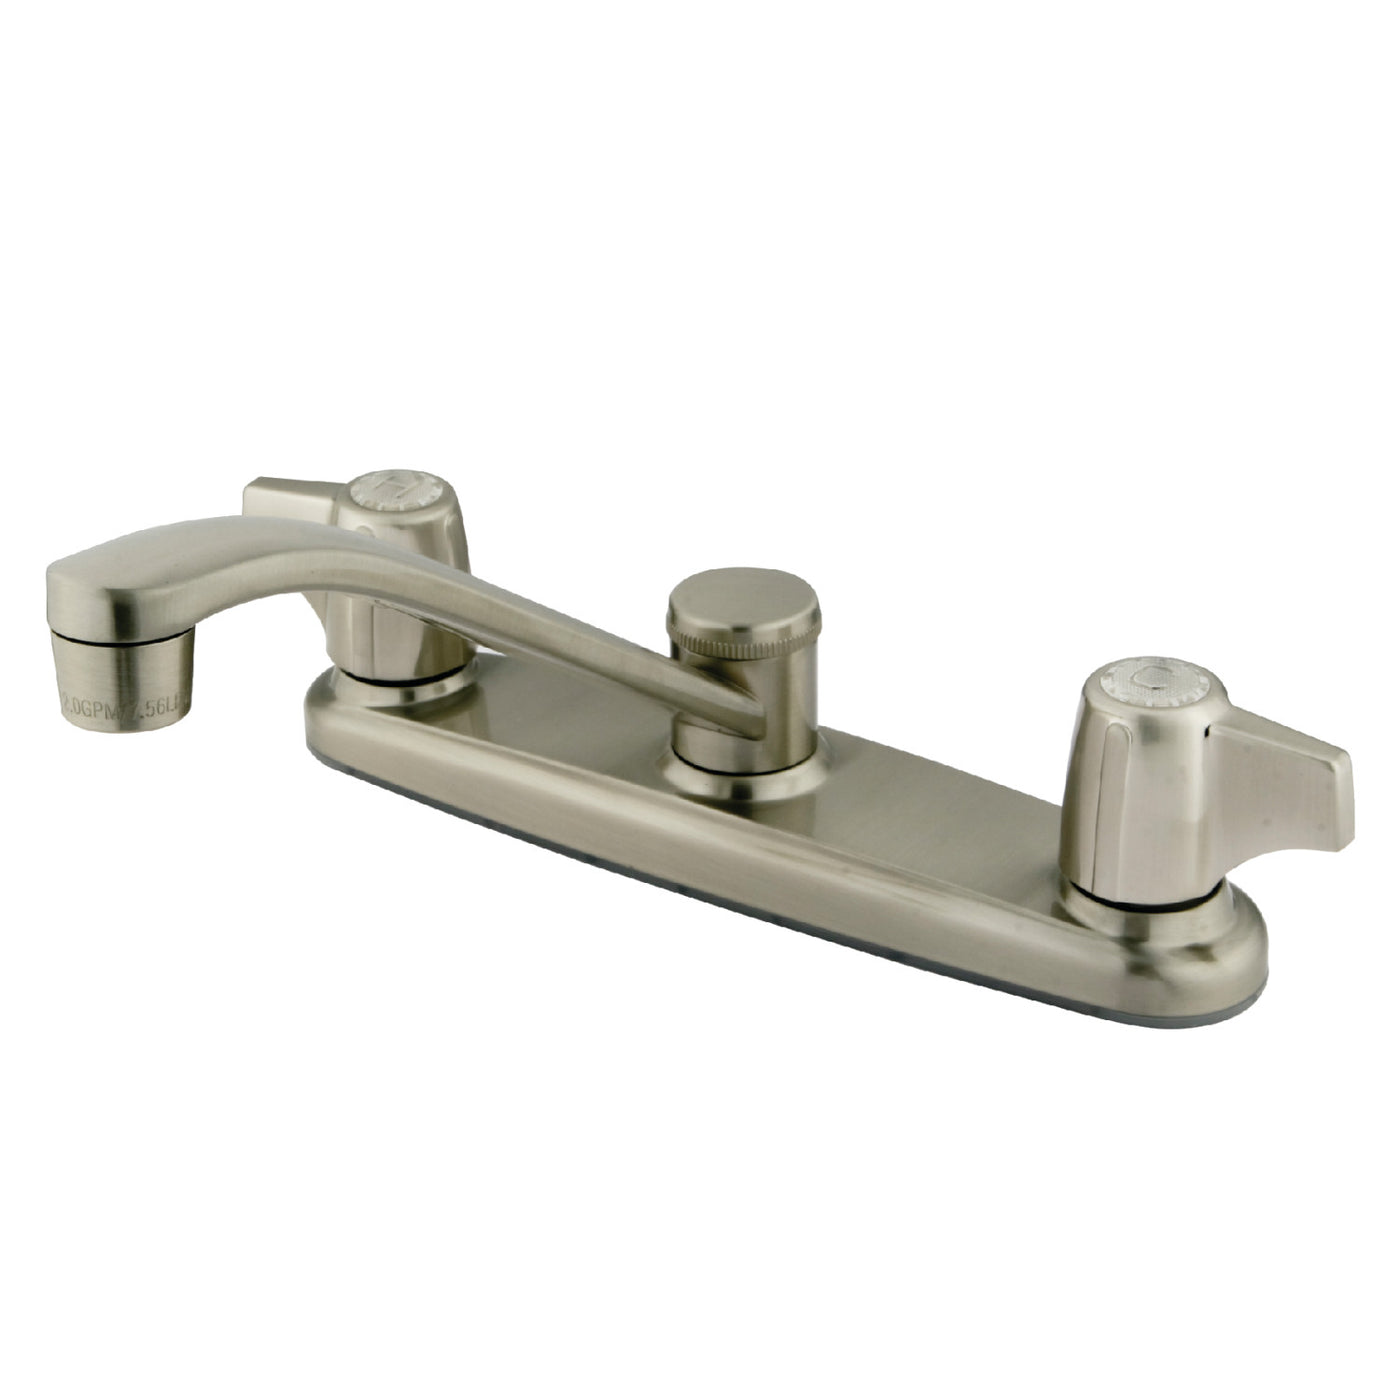 Elements of Design EB261SN 8-Inch Centerset Kitchen Faucet, Brushed Nickel